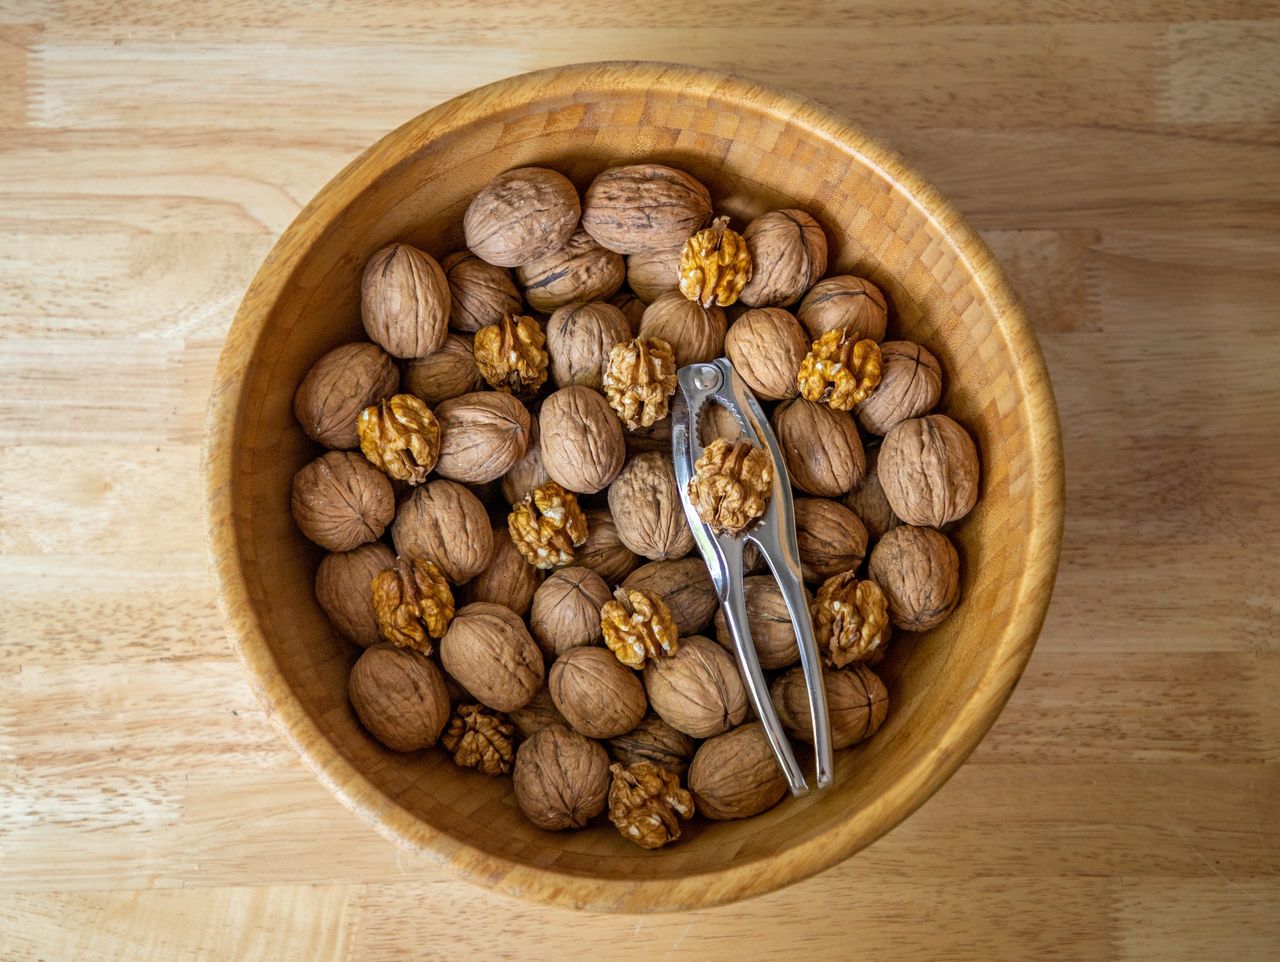 A closeup shot of walnuts in a brown bowl on wooden background